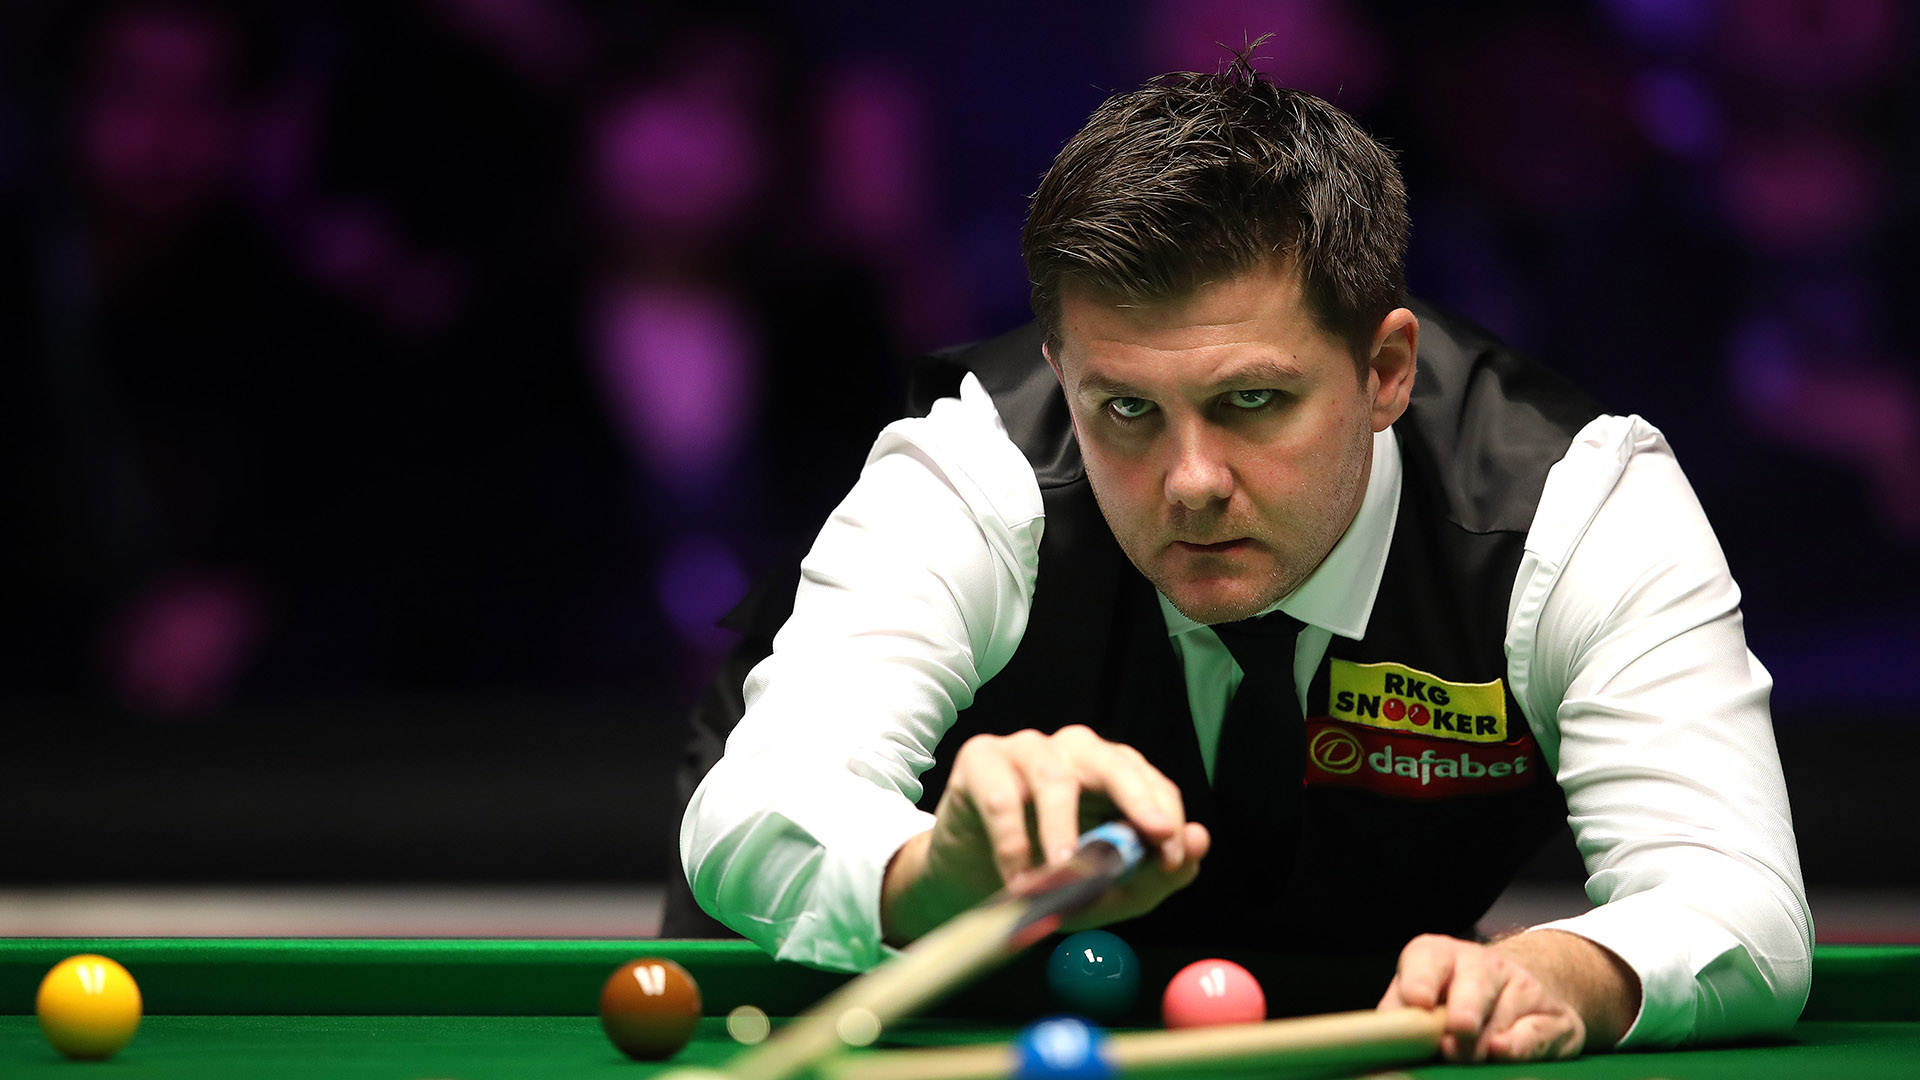 British Open snooker 2023 Draw, results, odds and TV coverage details